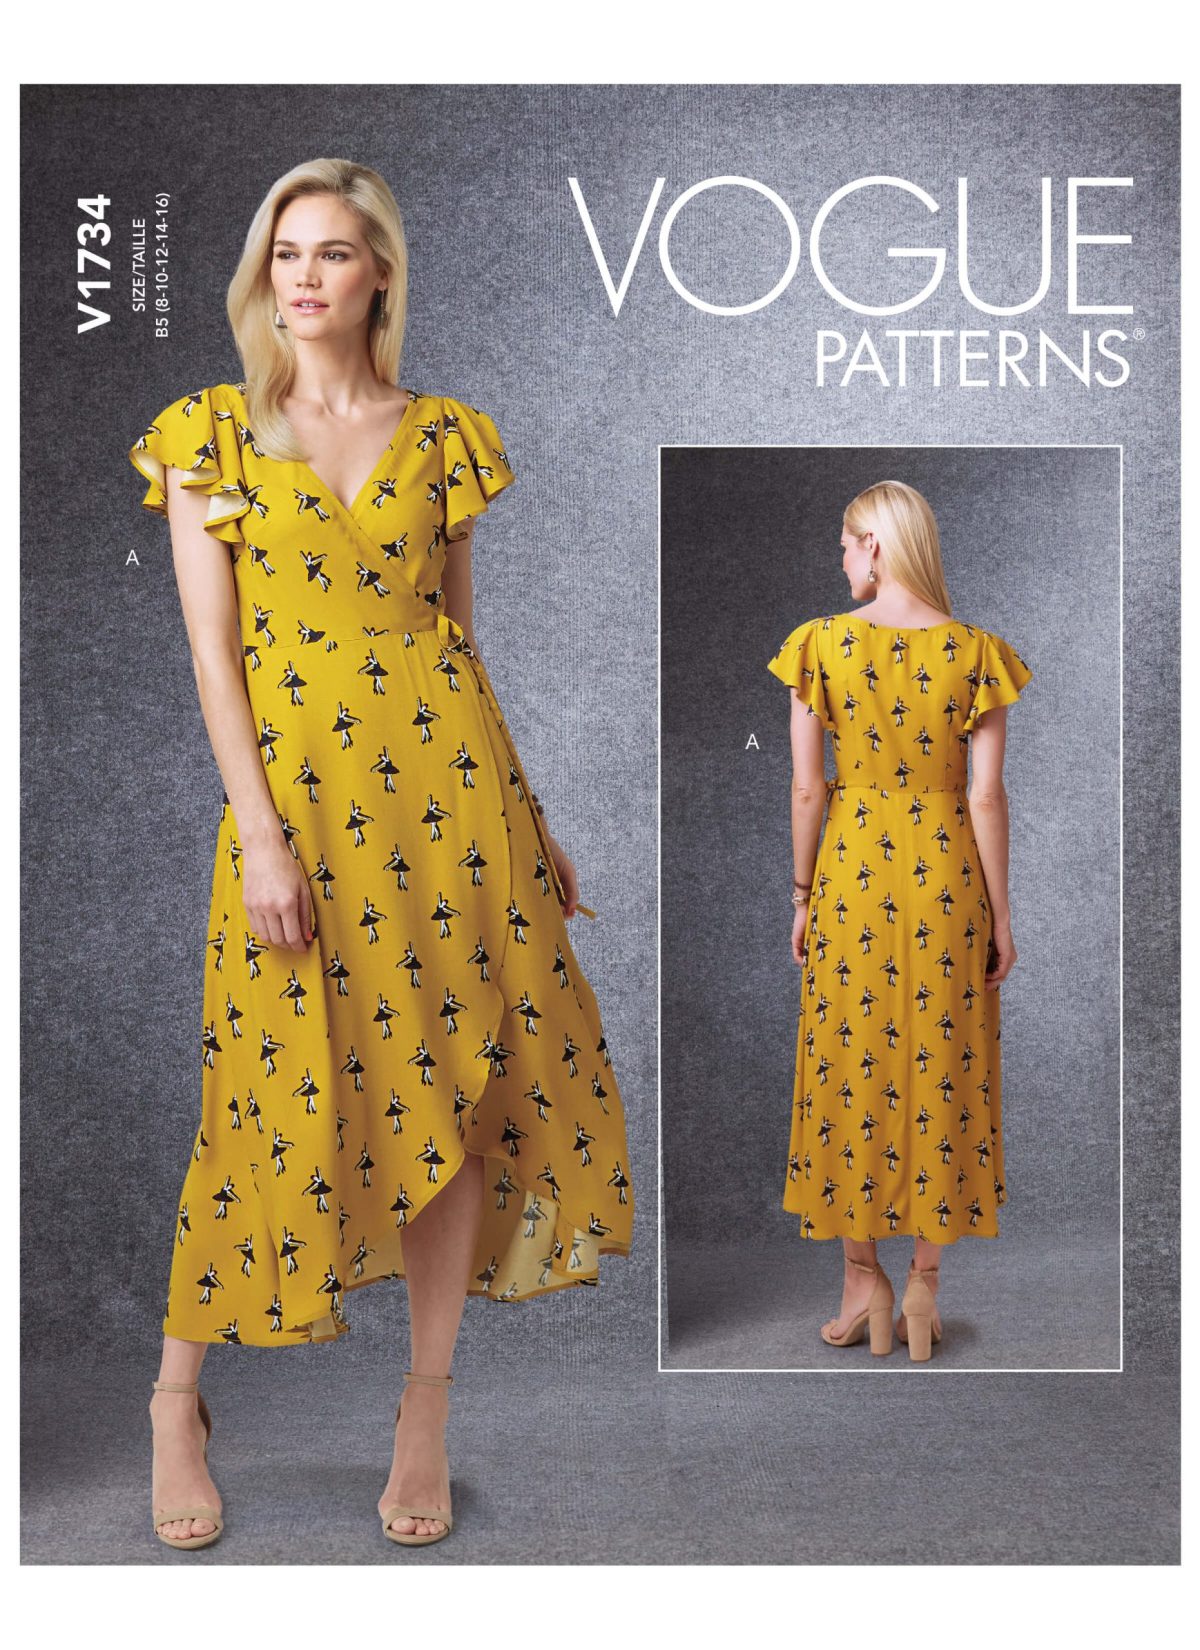 Vogue Patterns V1734 Misses' Wrap Dresses with Ties, Sleeve and Length Variations